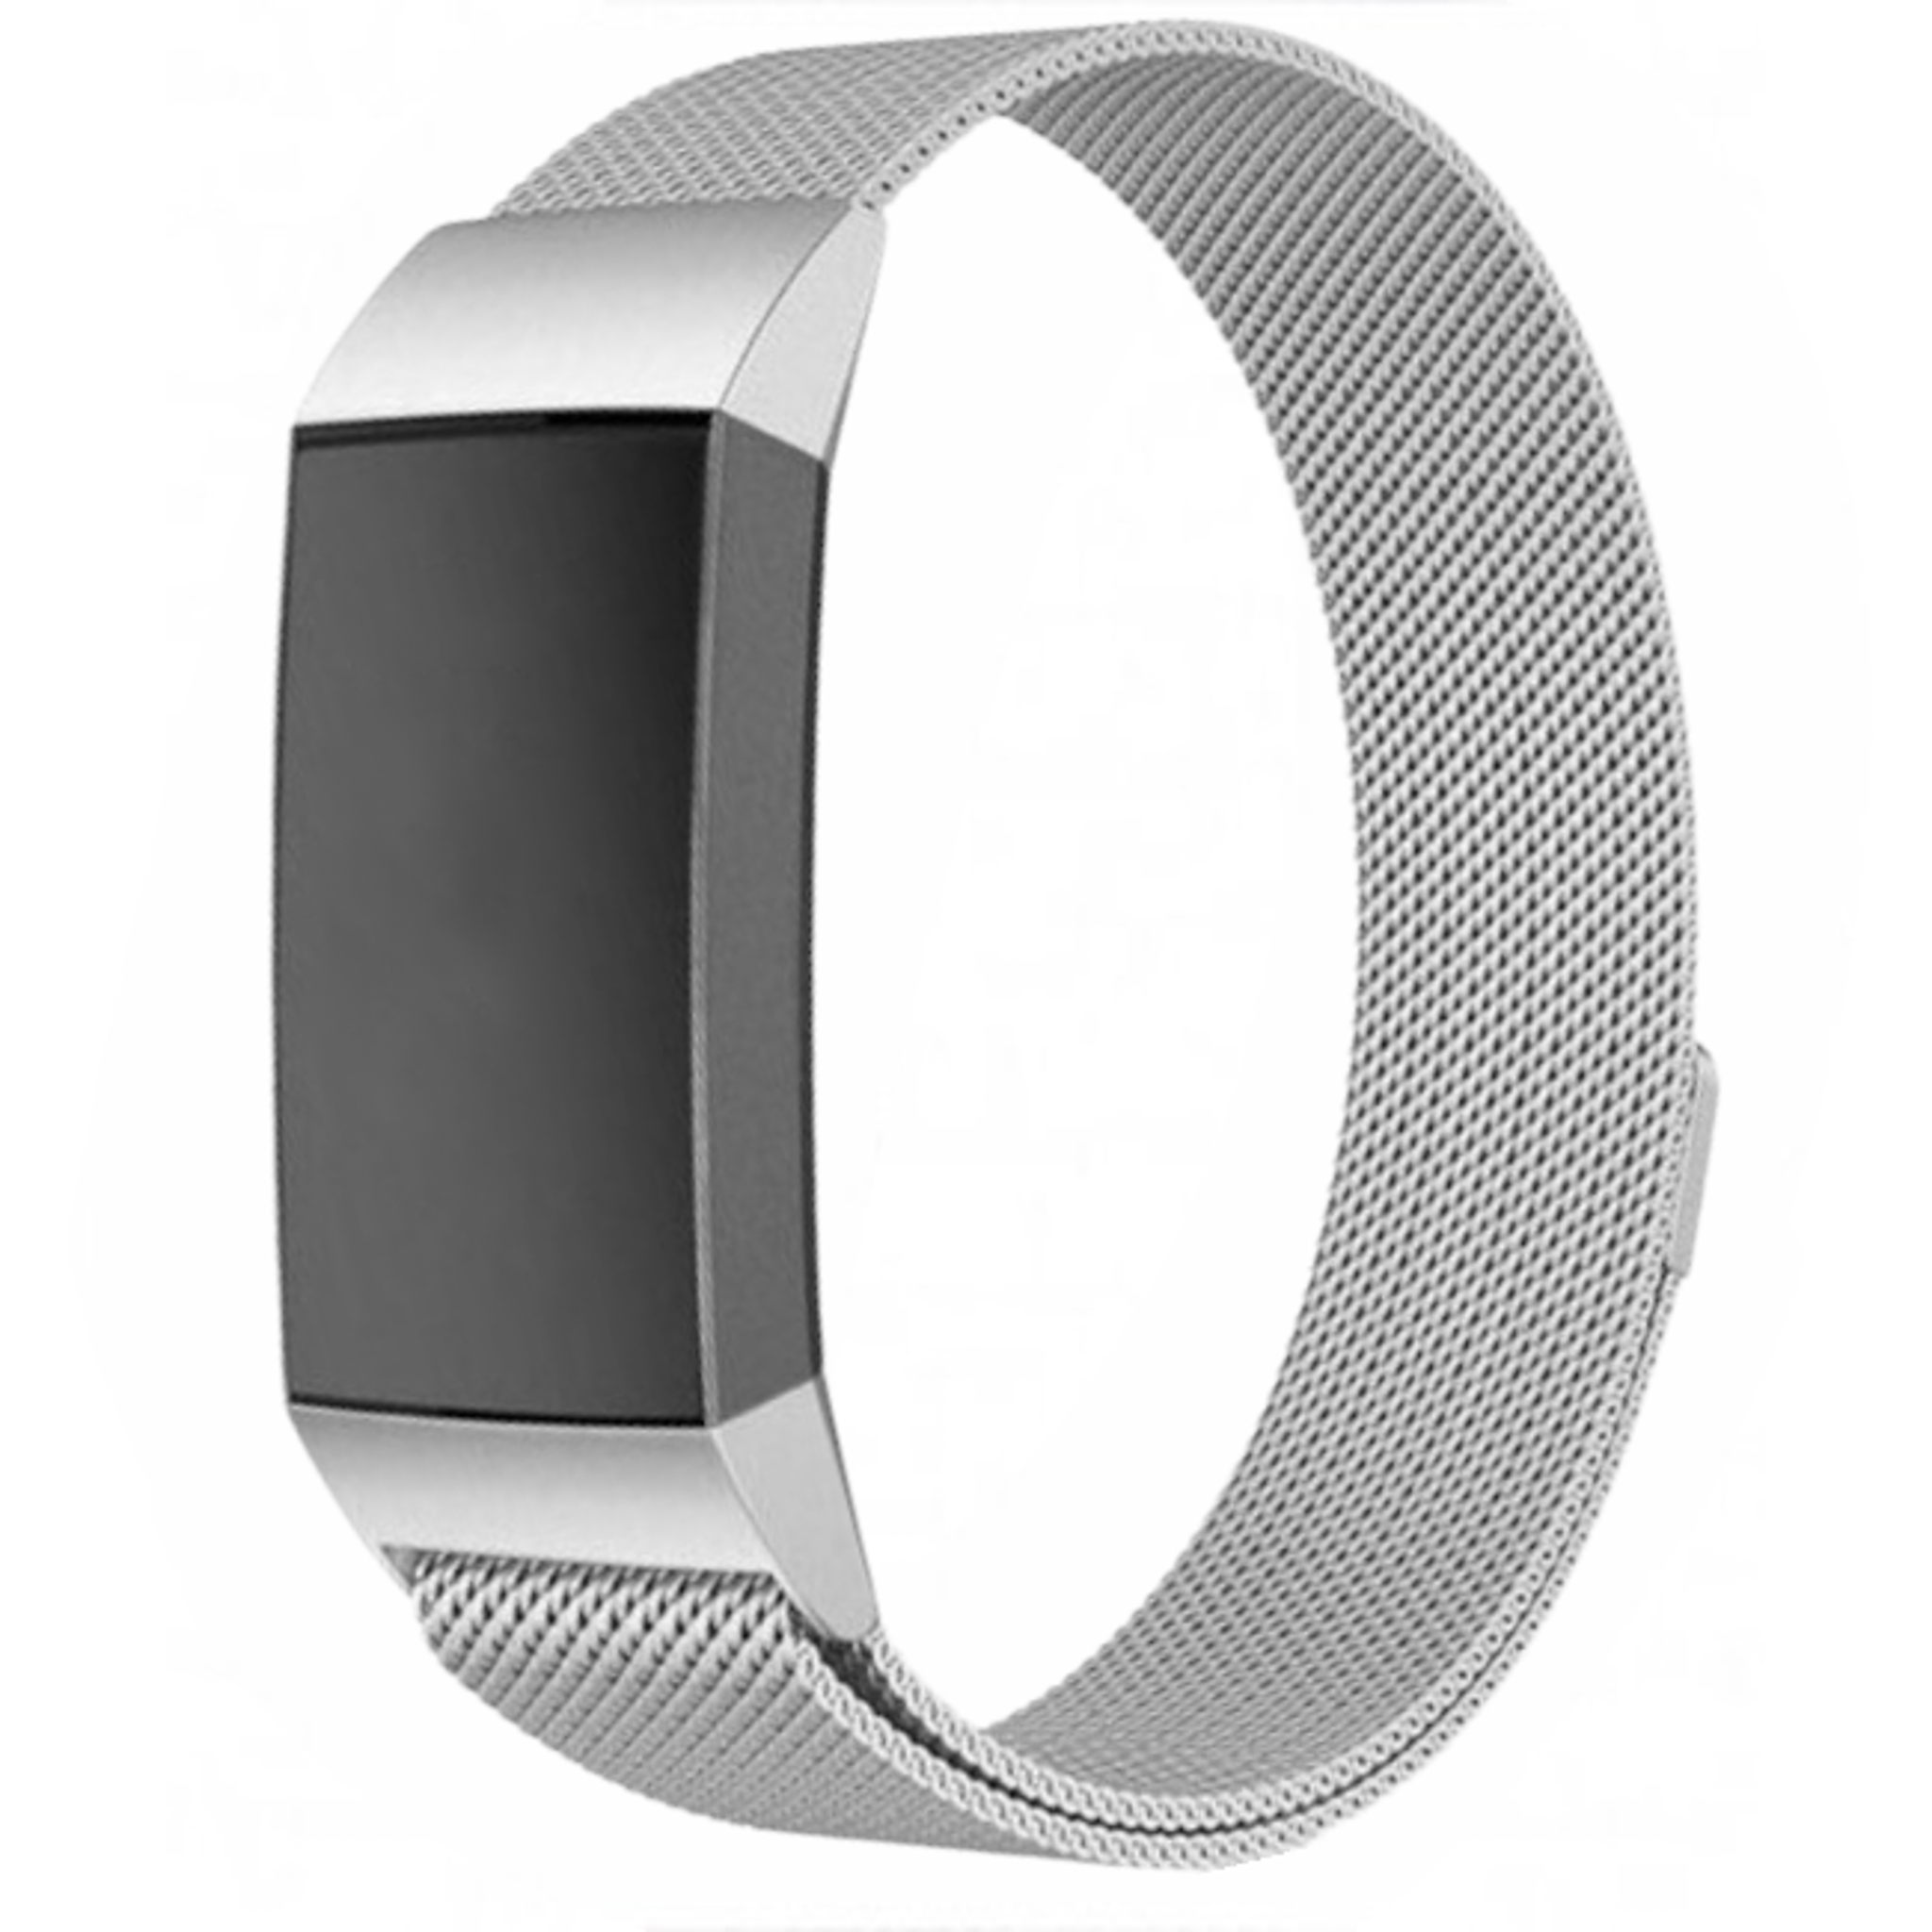 Cinturino loop in maglia milanese per Fitbit Charge 3 & 4 - argento